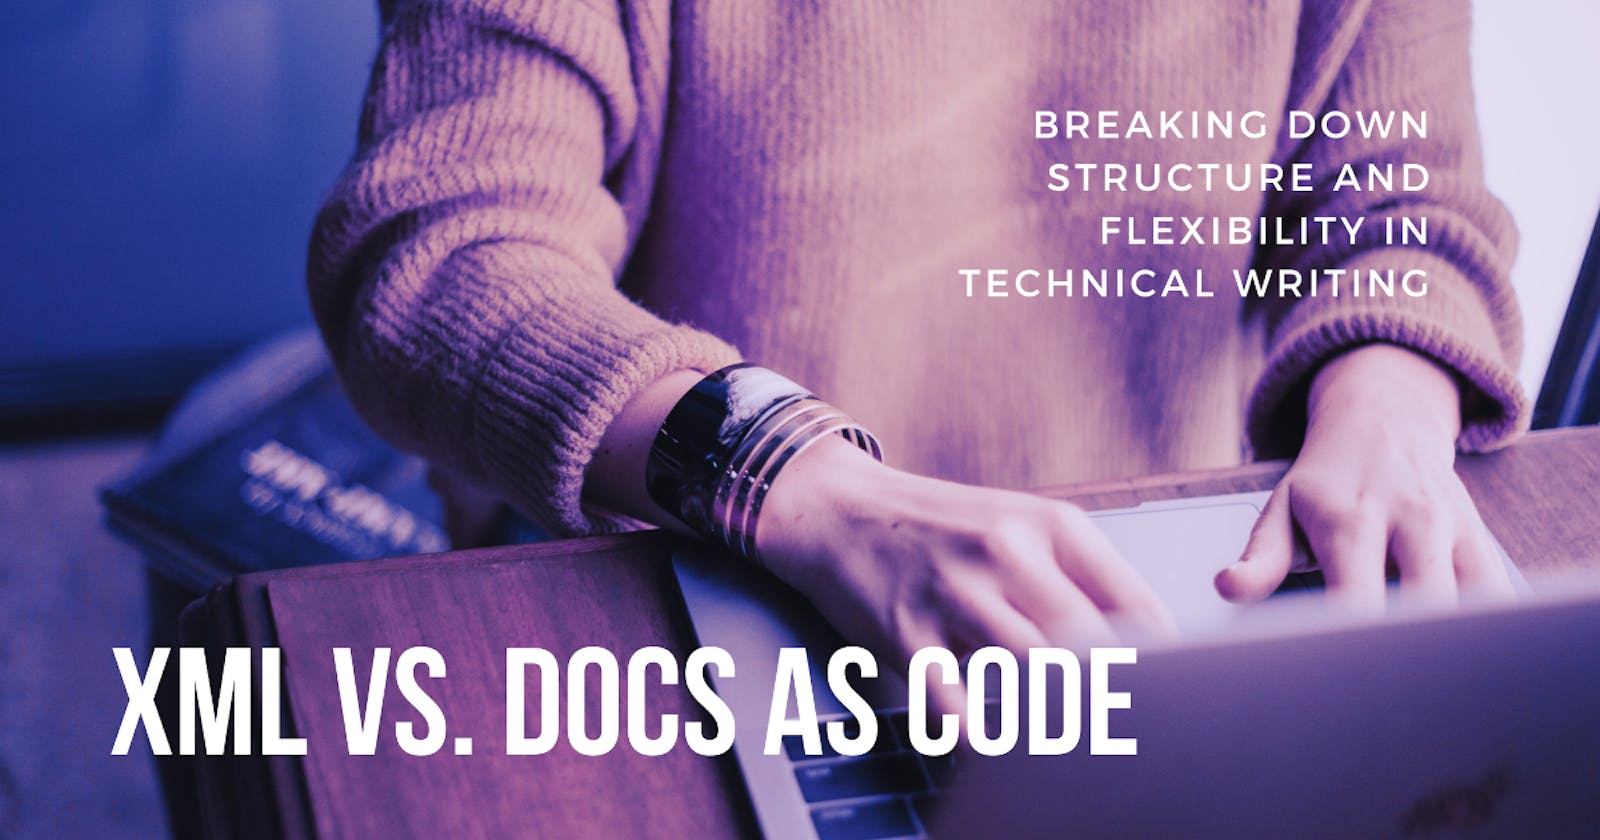 XML vs. Docs as Code: Breaking Down Structure and Flexibility in Technical Writing